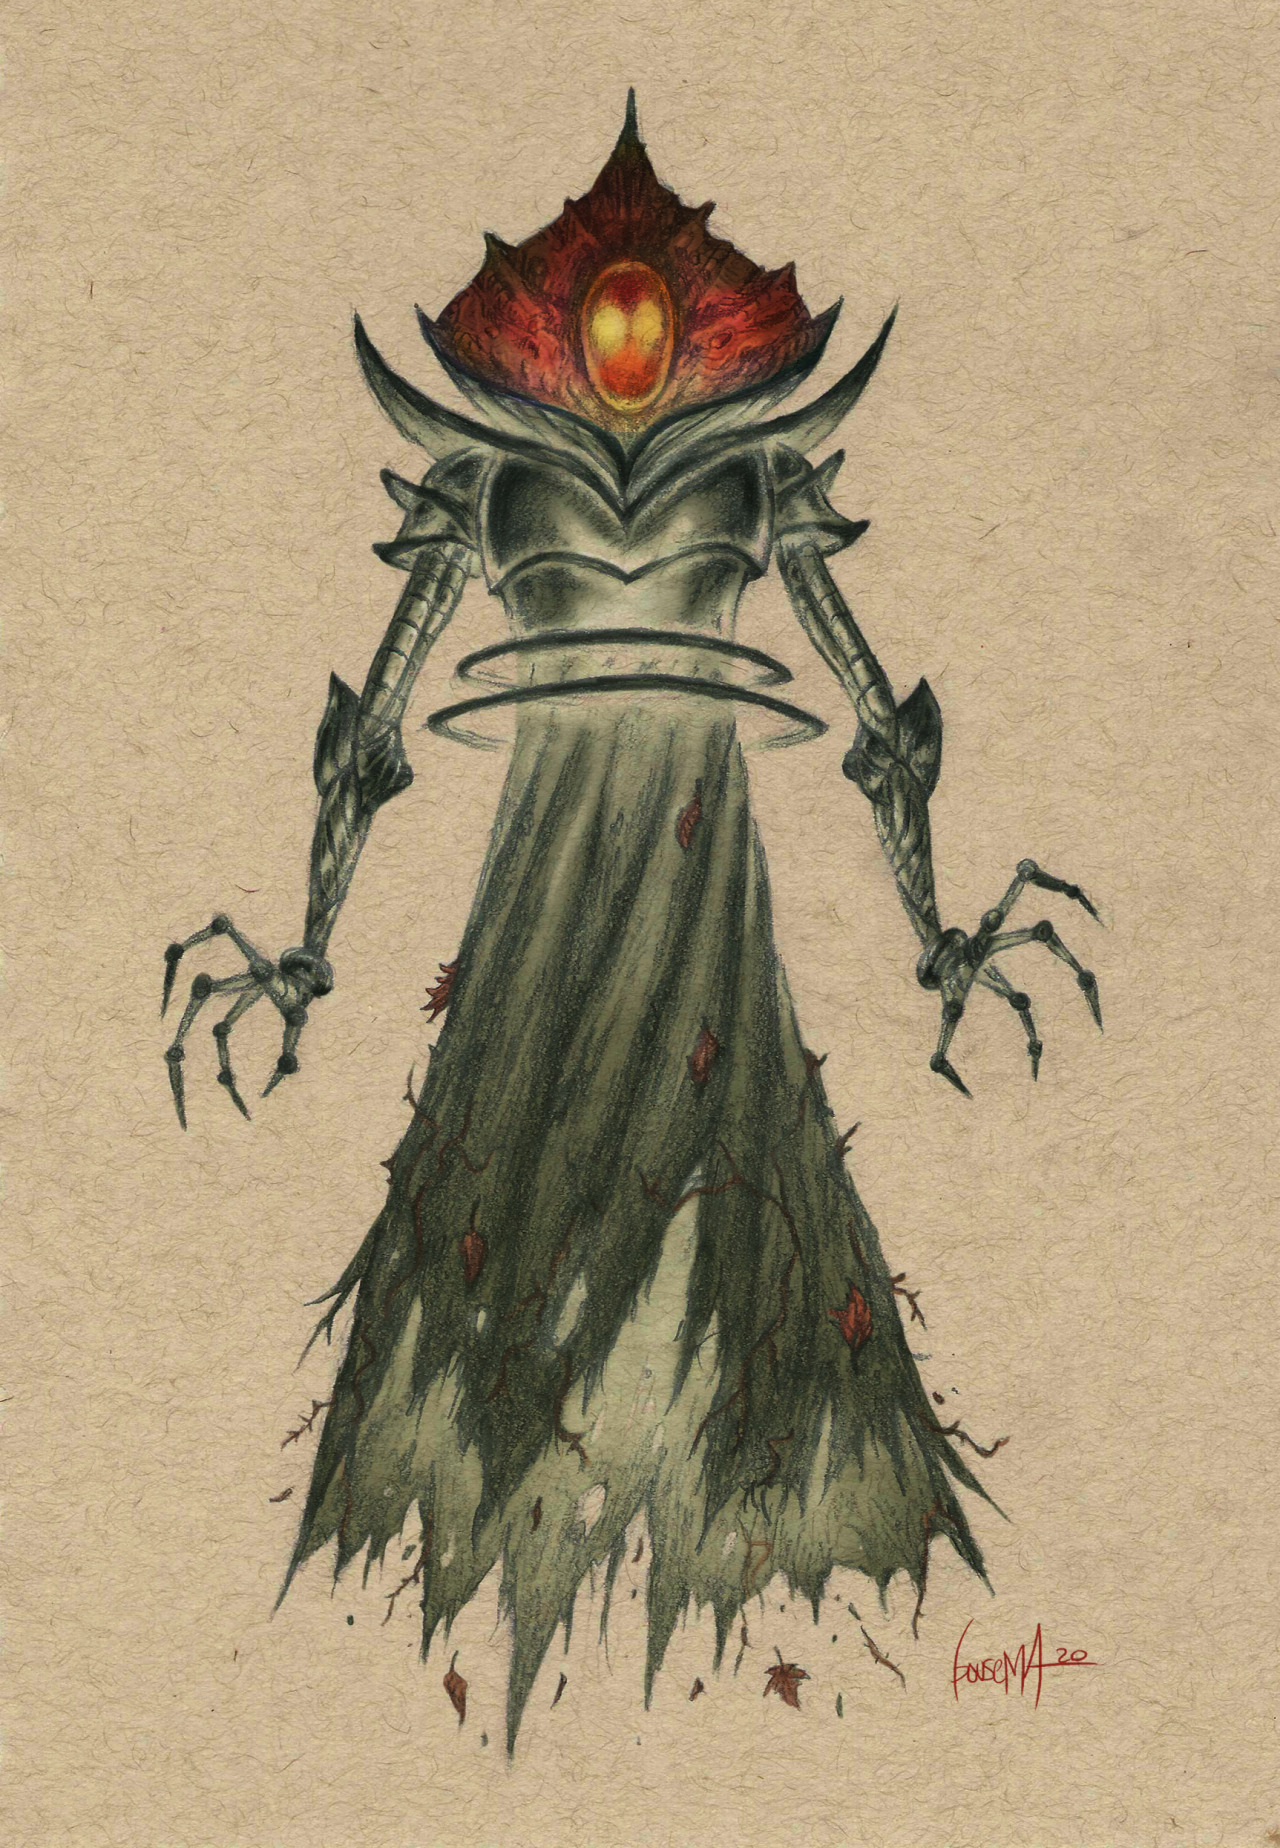 The Flatwoods Monster Voted on by my IG followers! My take was this alien is in a suit disguising as their surroundings through a sort of cloaking device. Very 50’s but still creepy
Gonna do 1 more cryptid and then start working on prints and a...